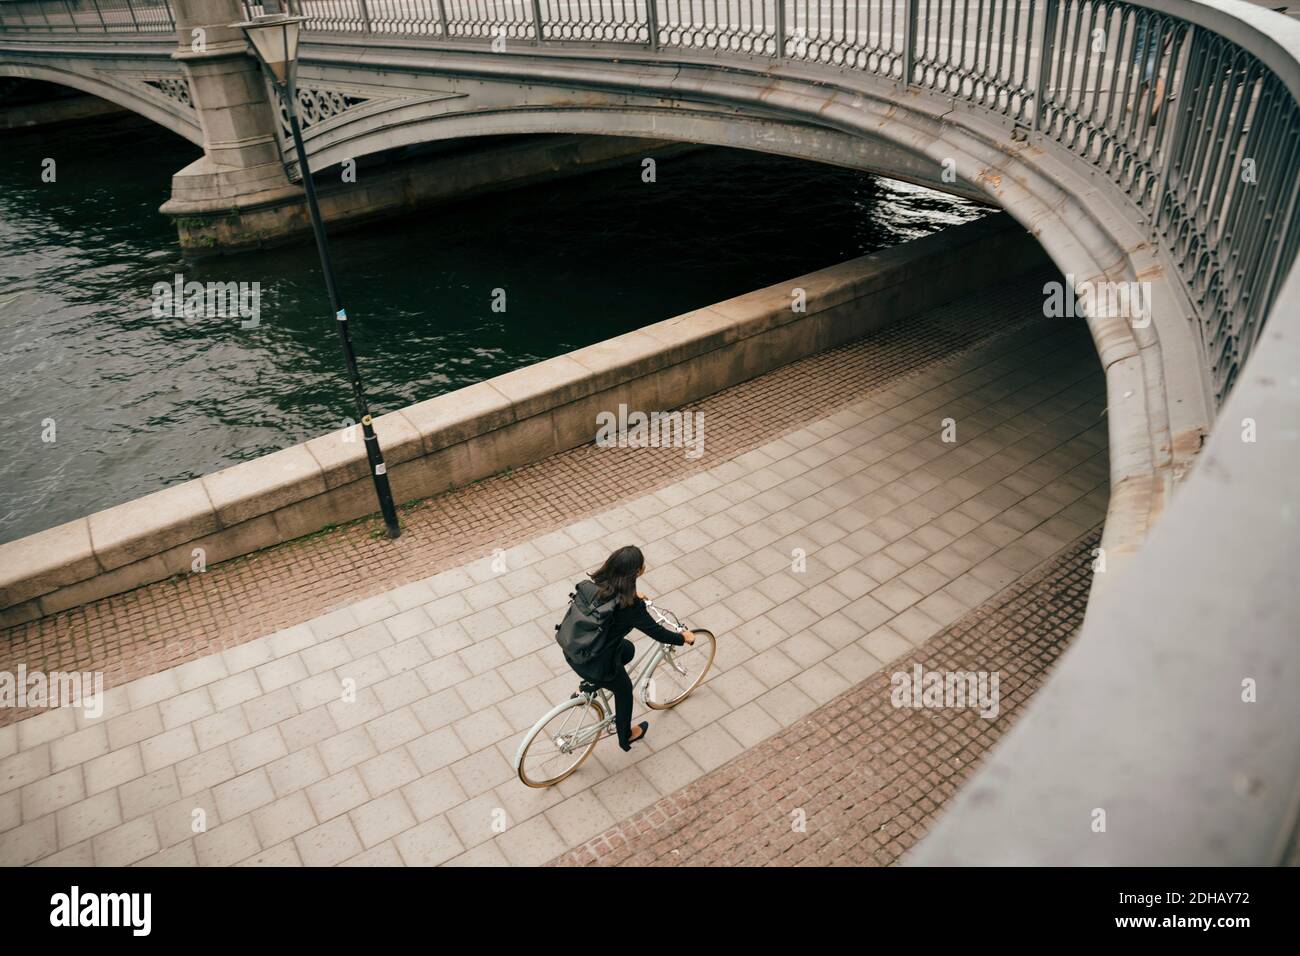 High angle view of businesswoman riding bicycle on footpath by canal in city Stock Photo